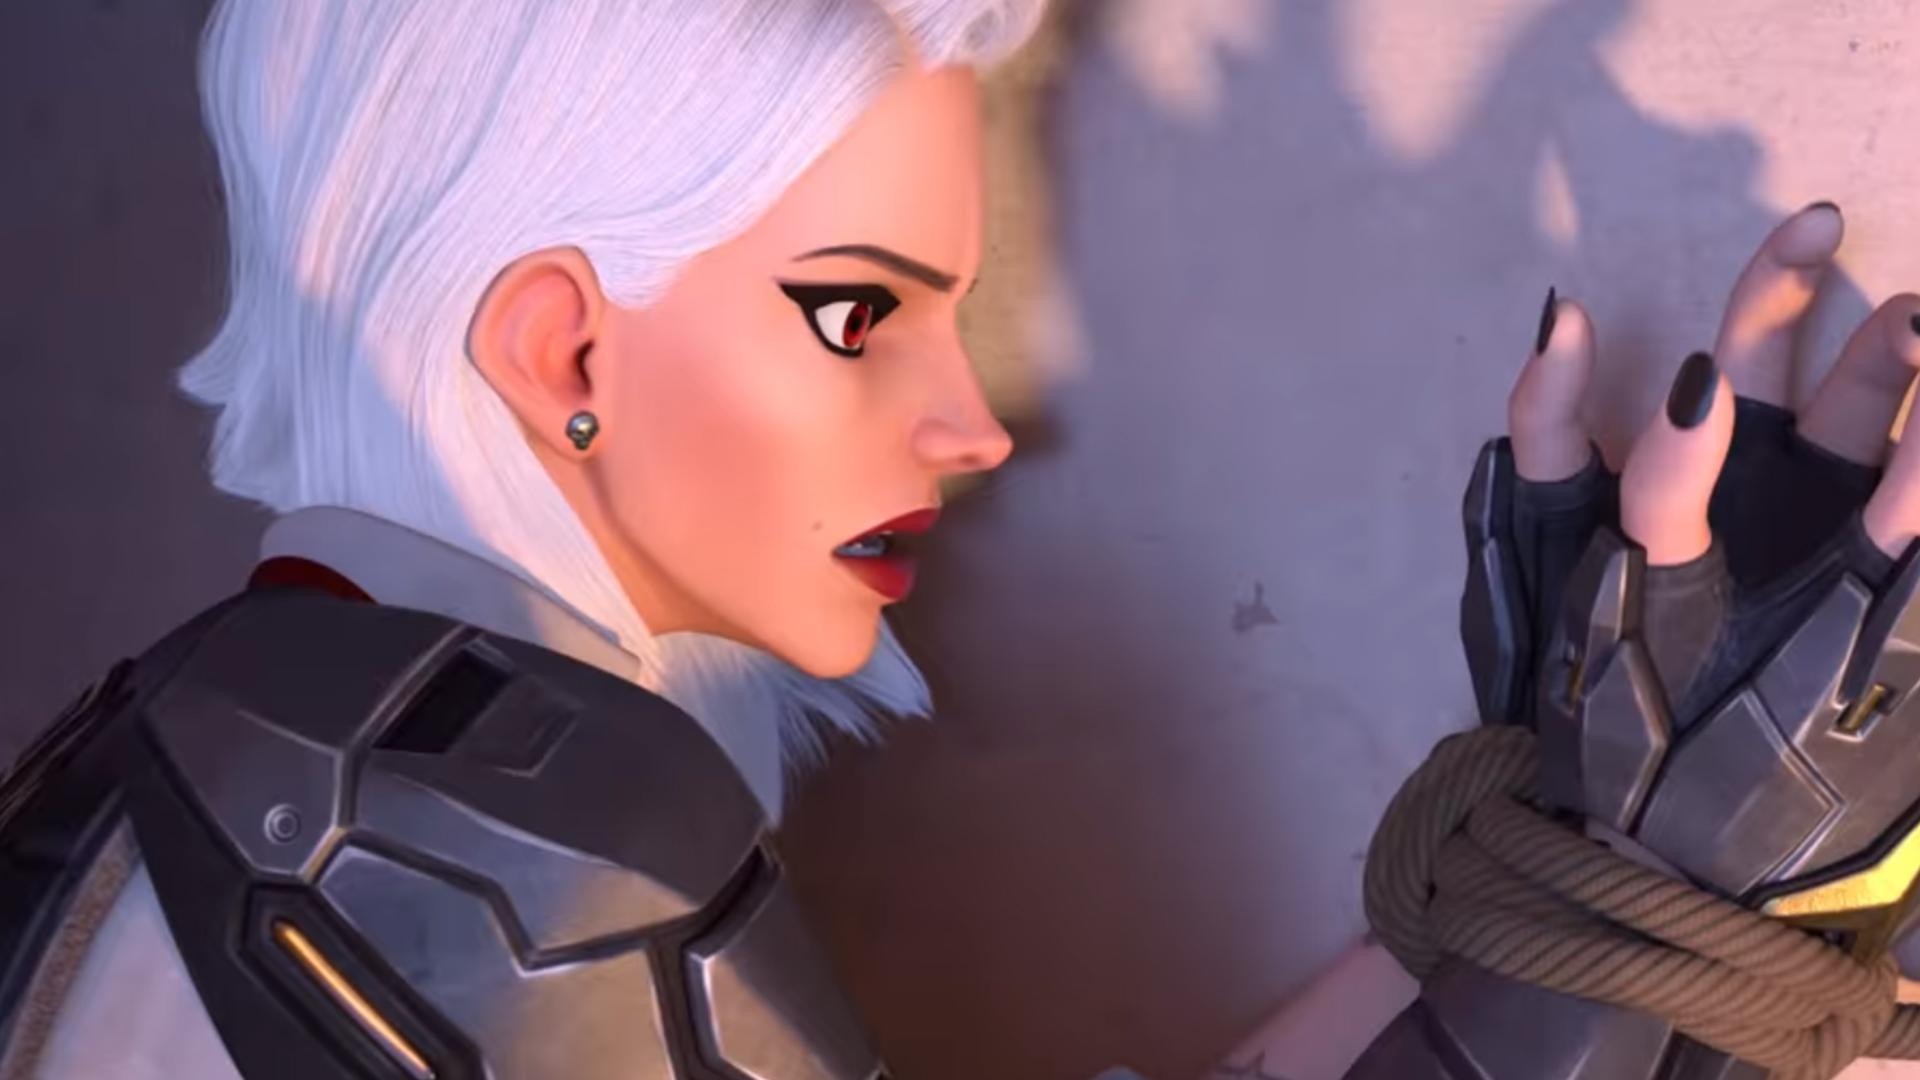 Overwatch porn searches have more than doubled since Ashe debuted